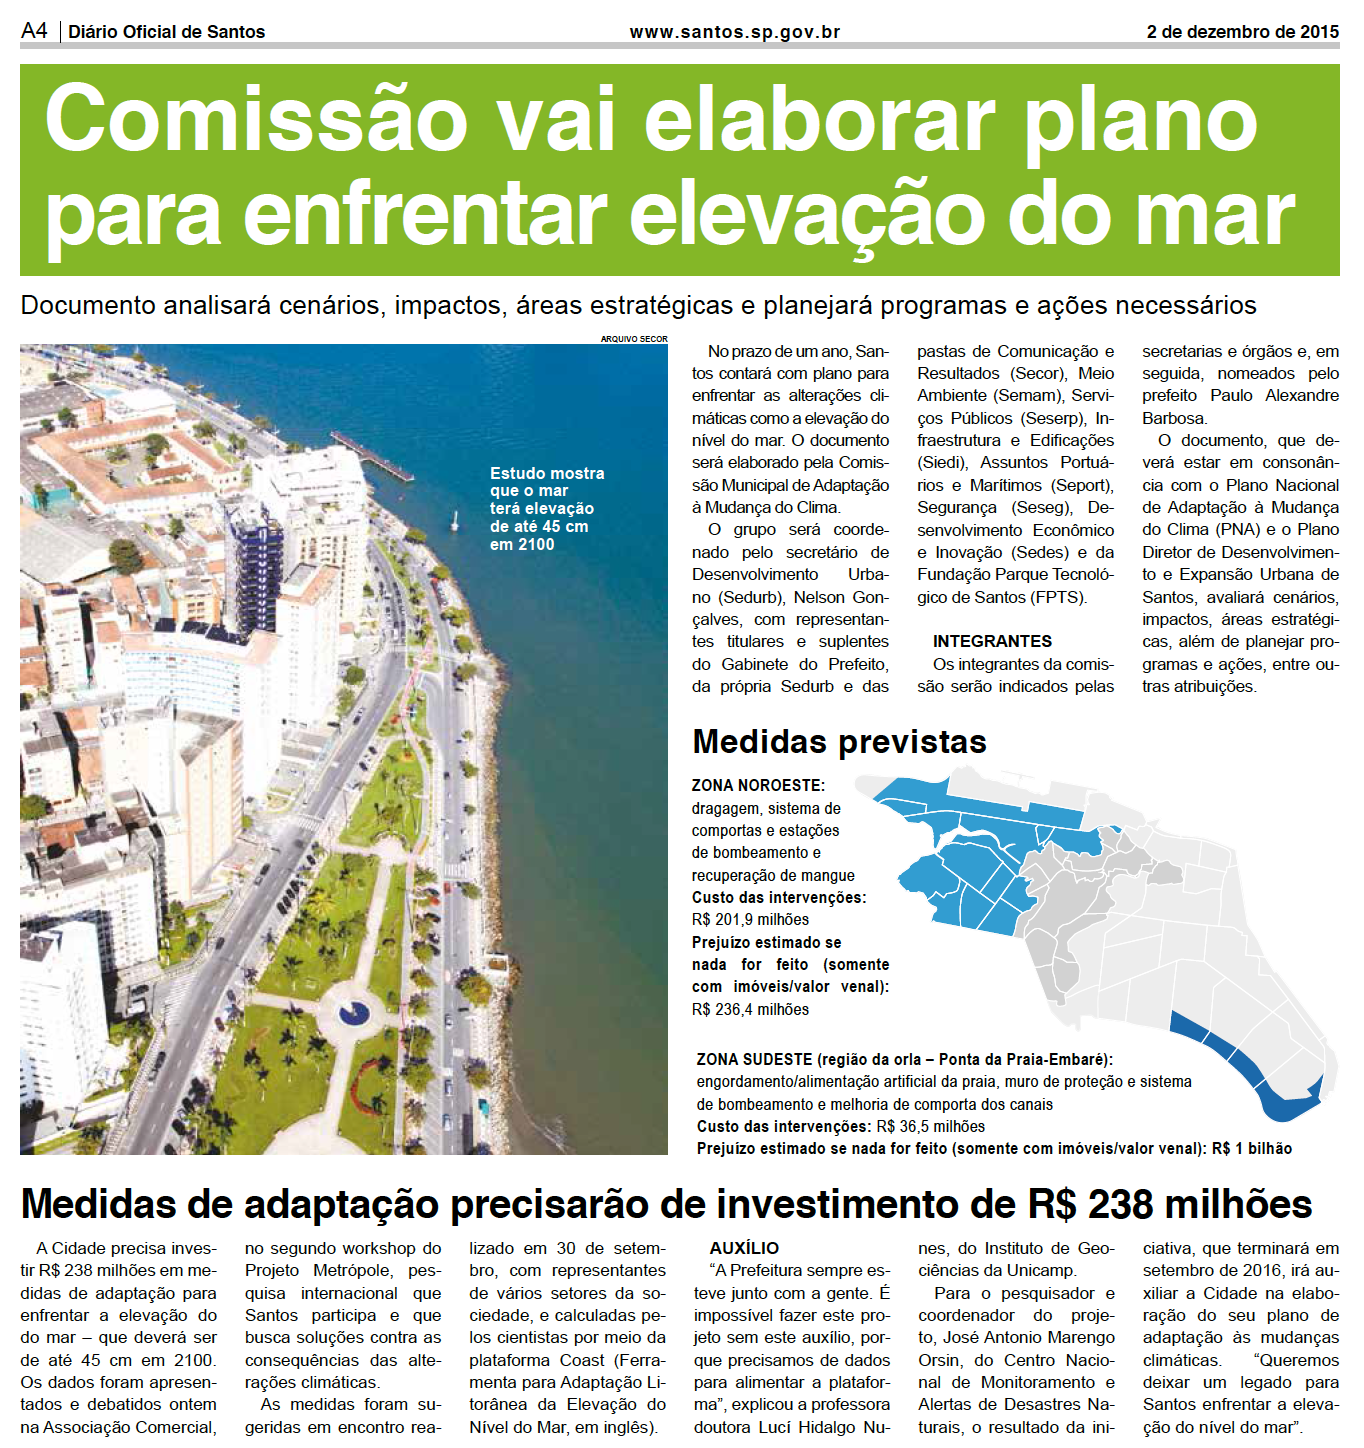 Impacts of METROPOLE: In January 2016, and considering the results of METROPOLE project, the Municipality of Santos created the Plano Municipal de Adaptacao a Mudanca de Clima (Municipal Plan for